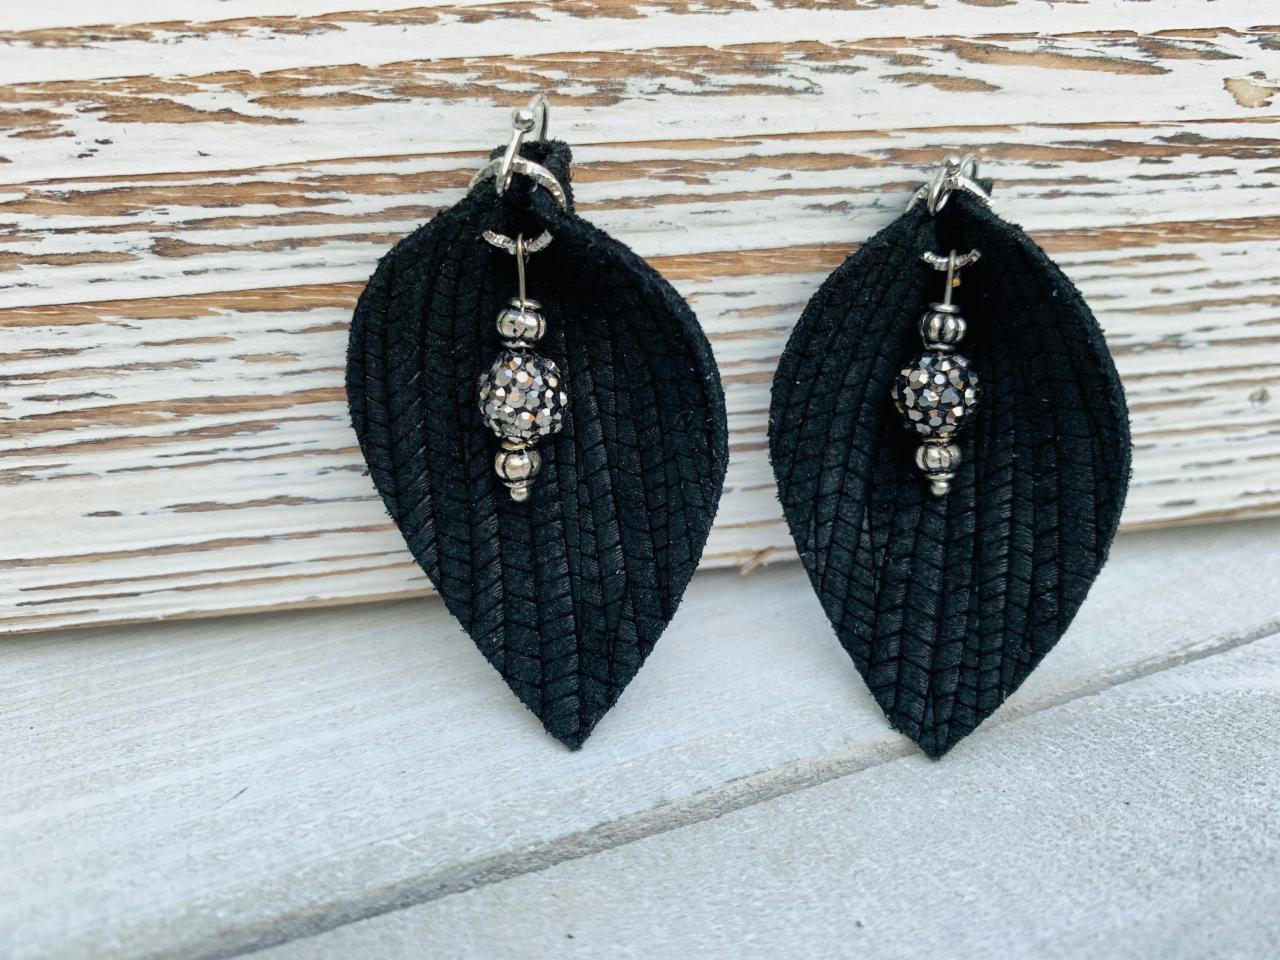 Cute Leather Earrings, Leather Earrings | Pinched Leather Earrings | Black Leather Earrings | Black Leather